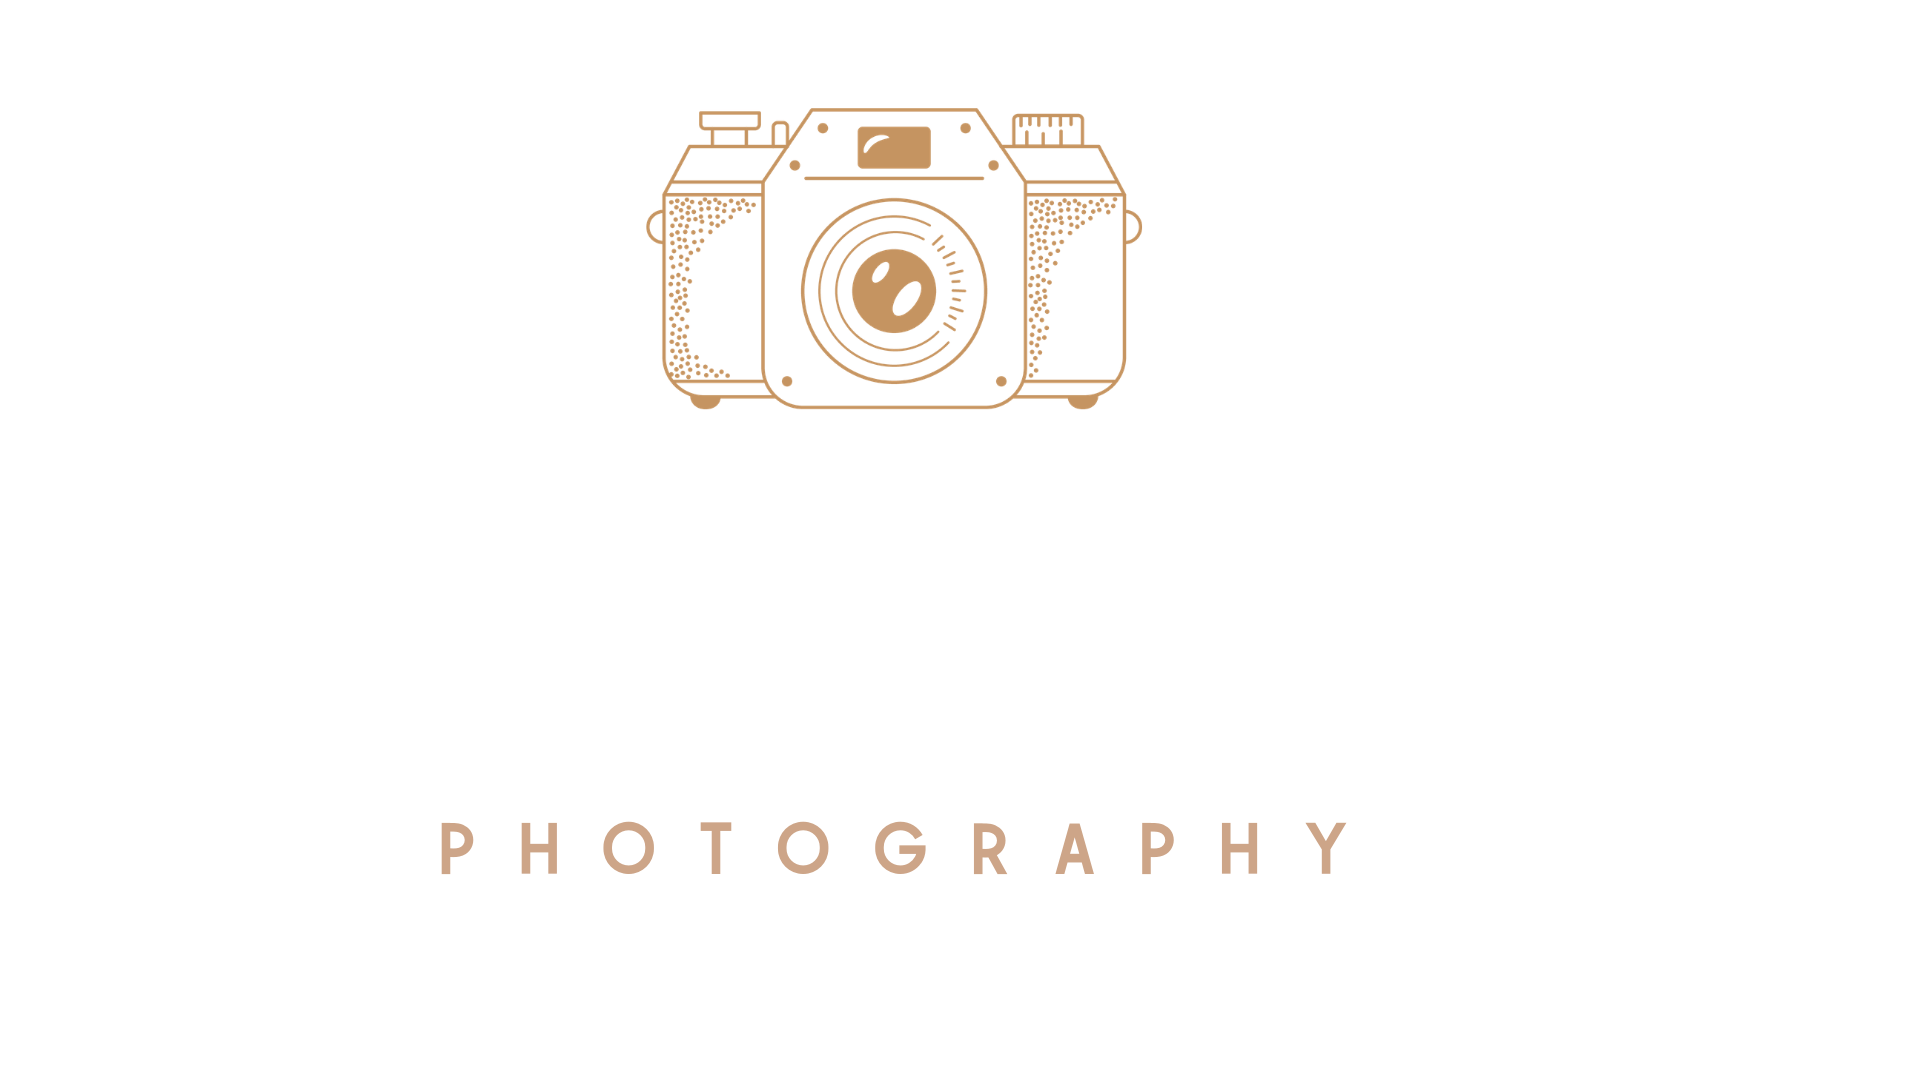 Chrissy Deming Photography